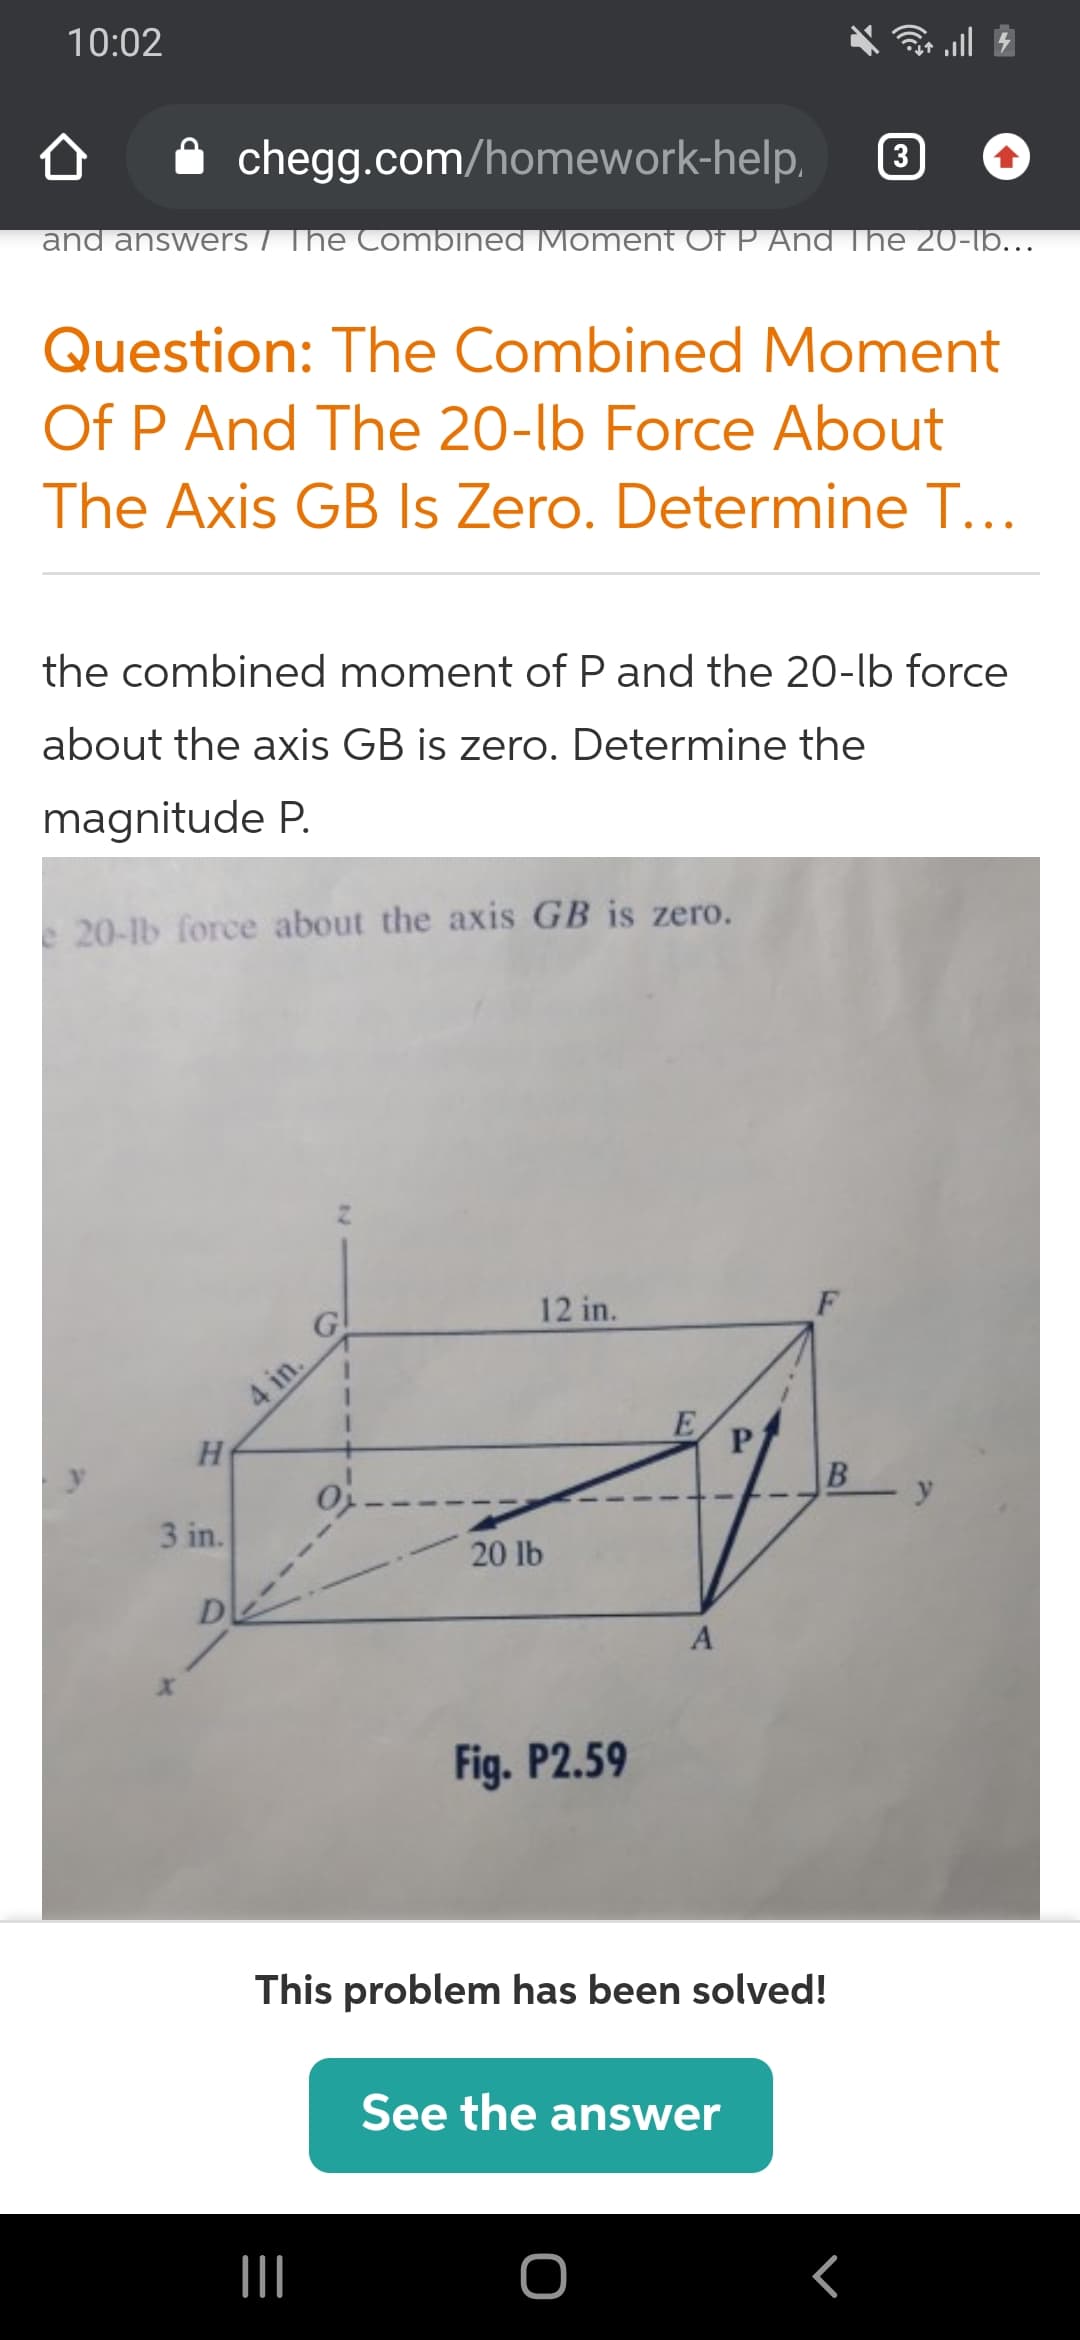 10:02
chegg.com/homework-help.
3
and answers / The Combined Moment Of P And The 20-lb...
Question: The Combined Moment
Of P And The 20-lb Force About
The Axis GB Is Zero. Determine T...
the combined moment of P and the 20-lb force
about the axis GB is zero. Determine the
magnitude P.
e20-lb force about the axis GB is zero.
12 in.
F
4 in.
y
3 in.
20 lb
D
A
Fig. P2.59
This problem has been solved!
See the answer
II
